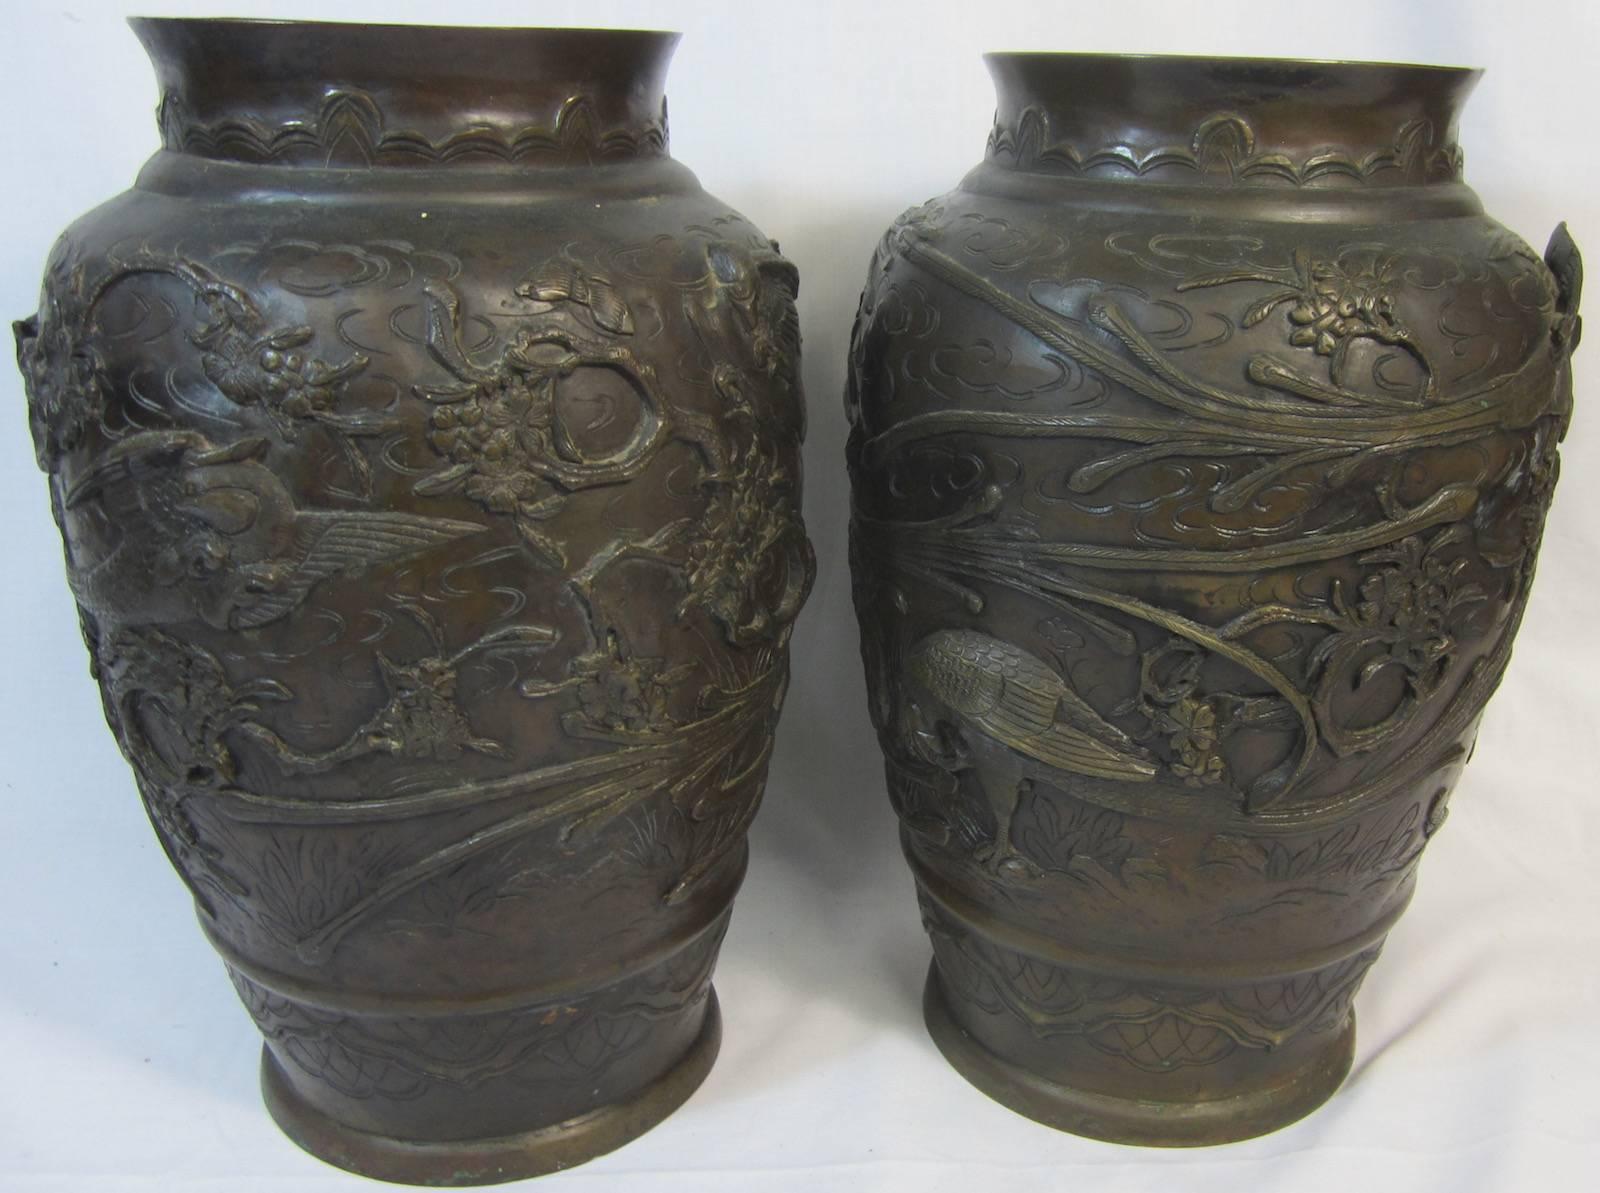 Pair of Japanese Meiji period (1868-1912) bronze urns (34cm high) on wooden bases, 
foundry mark on base. 
46 cm total height x 22 cm diameter measures.
Note minor damage to one base.